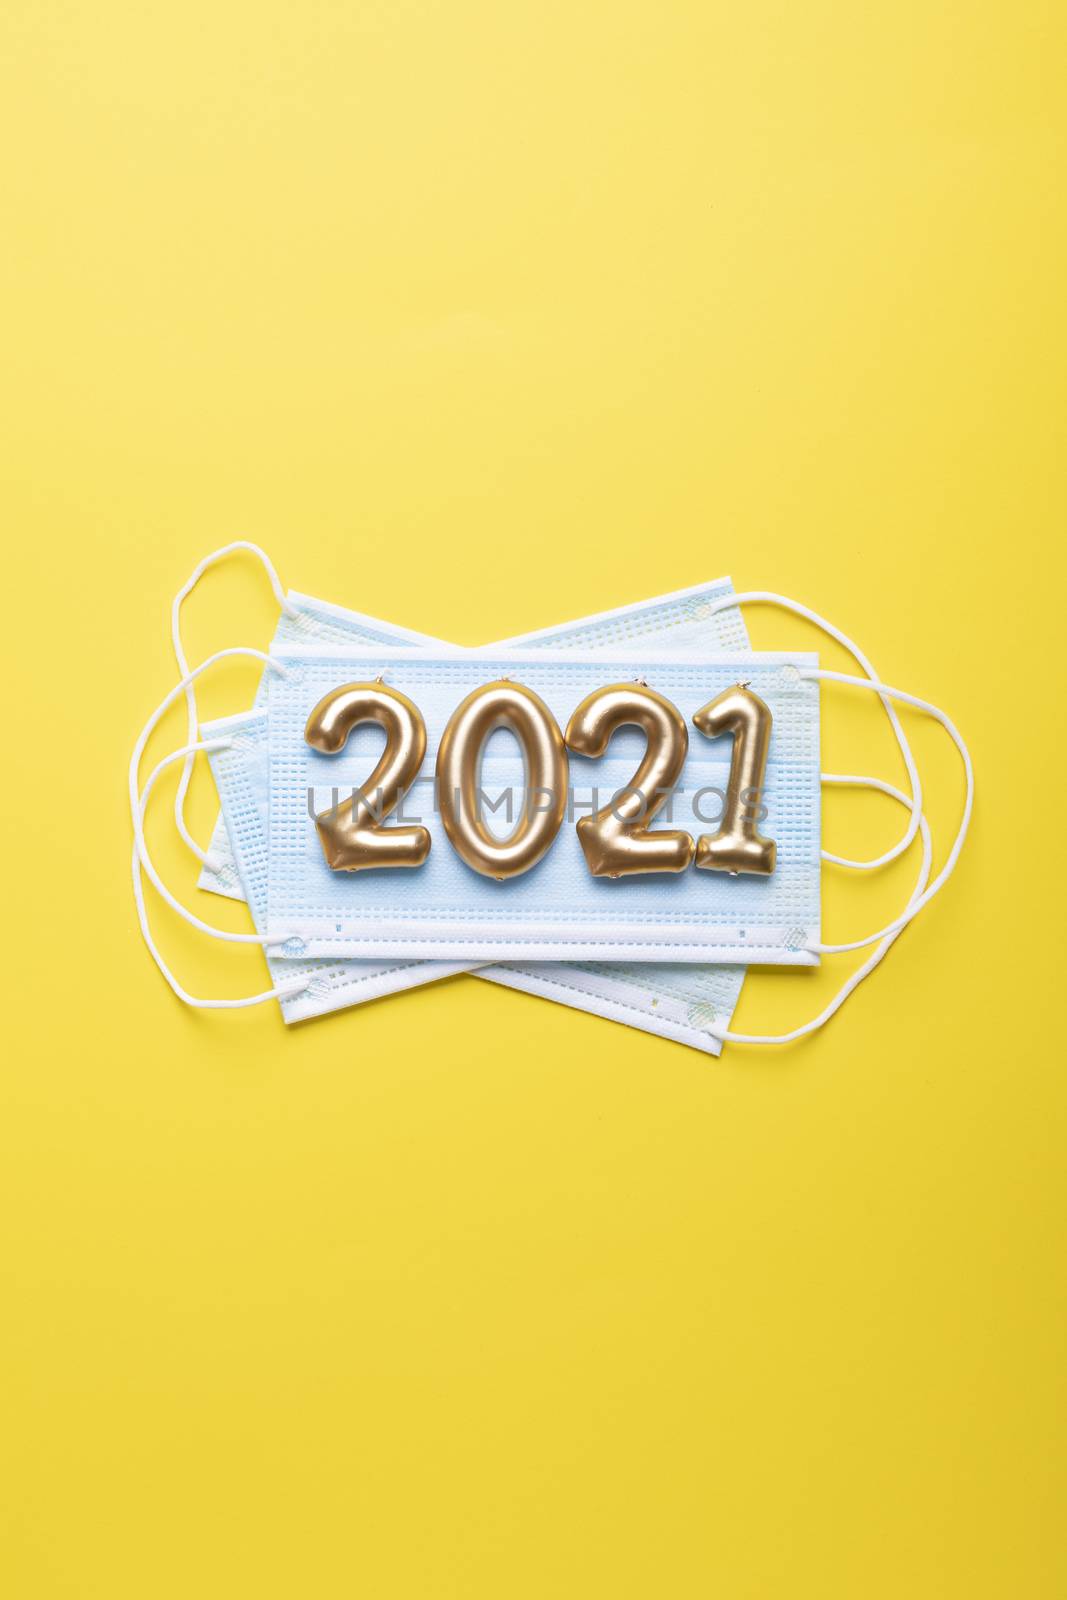 Happy new year 2021 with face mask on yellow background by adamr